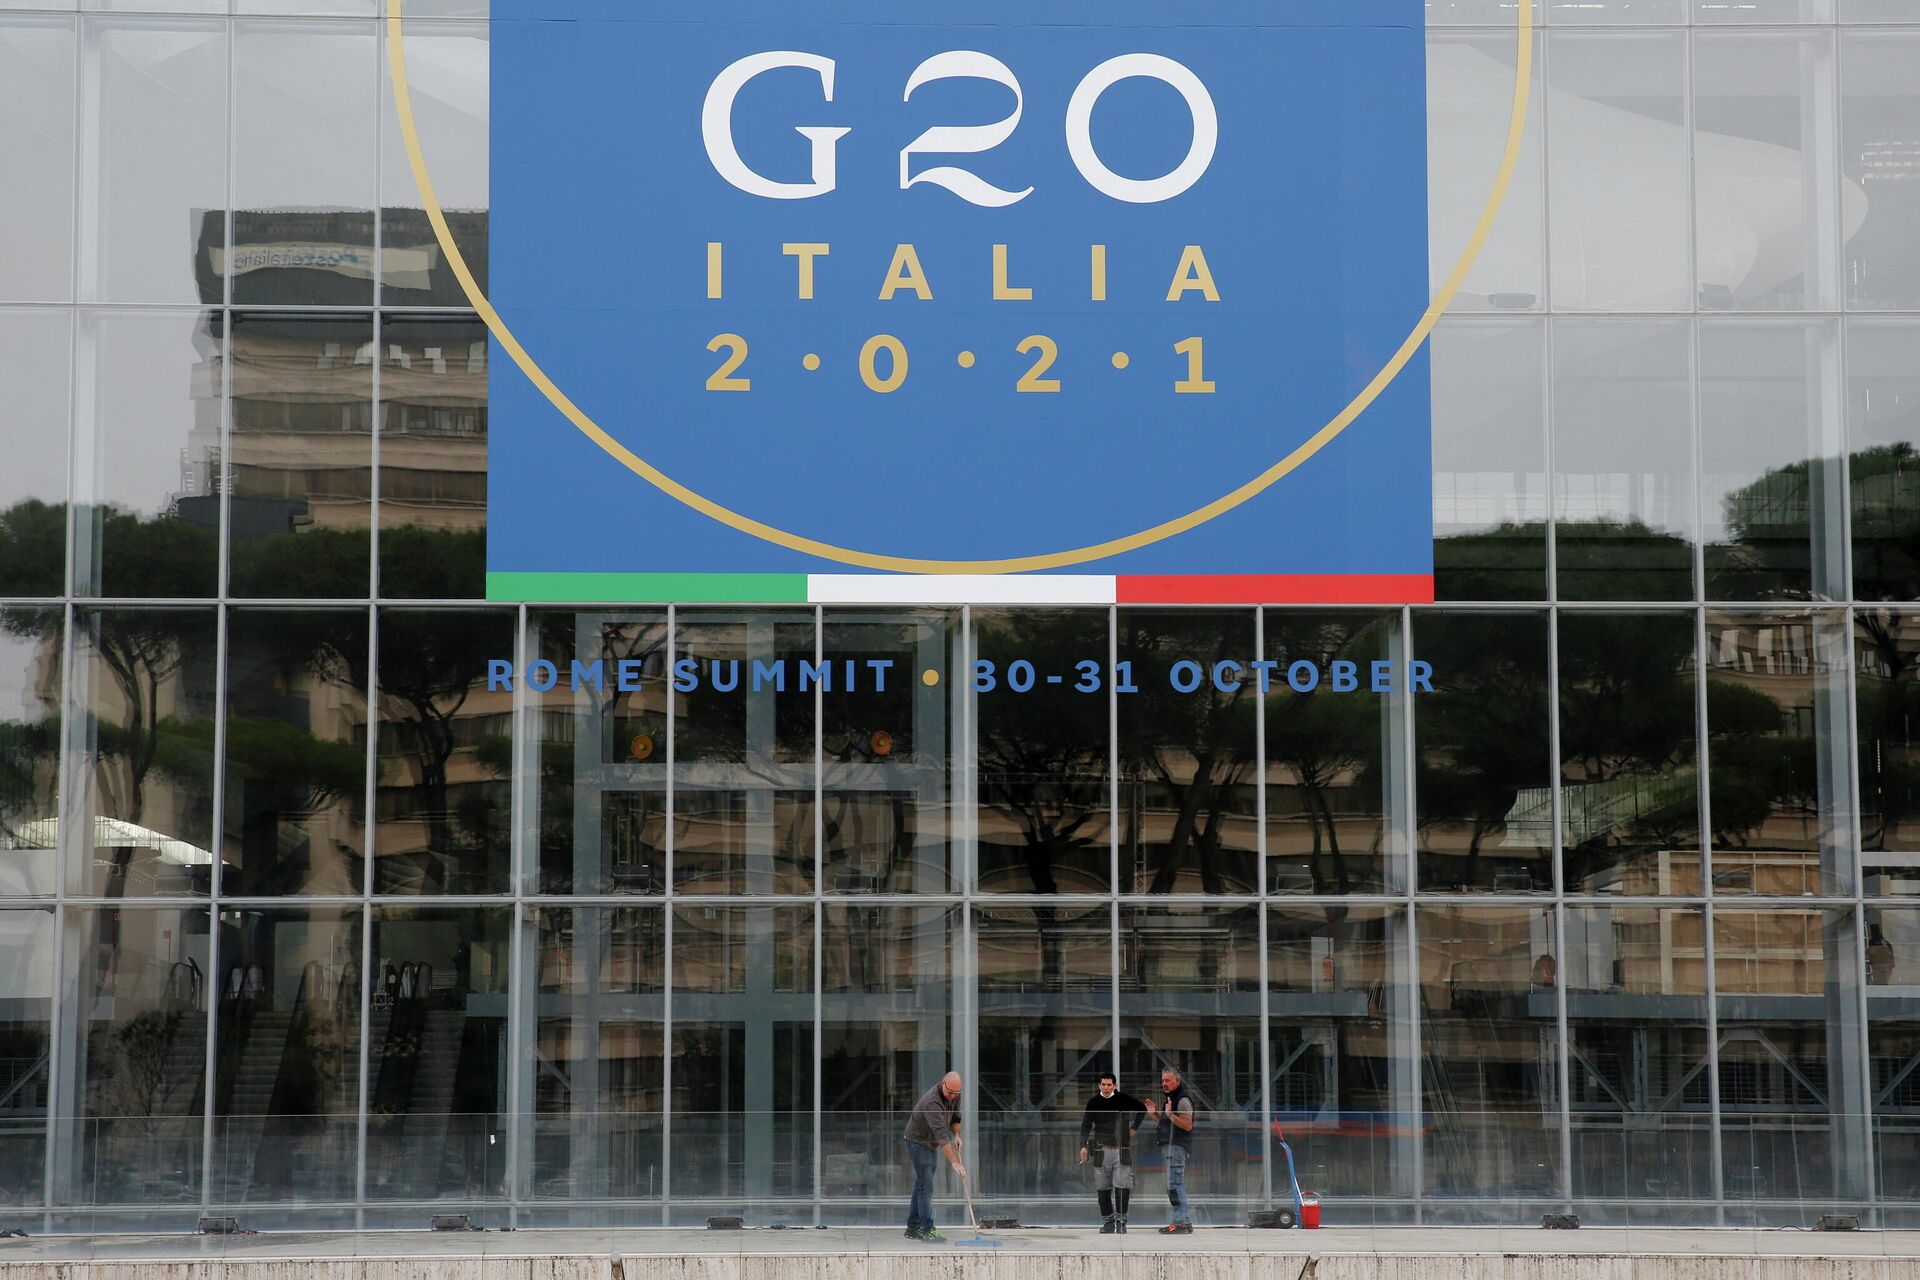 Workers clean in front of the Rome Convention Centre 'La Nuvola', in the city's EUR district, that will host the G20 summit with heads of state from major nations for a two-day meeting from October 30-31, in Rome, Italy, October 22, 2021.  - Sputnik International, 1920, 30.10.2021